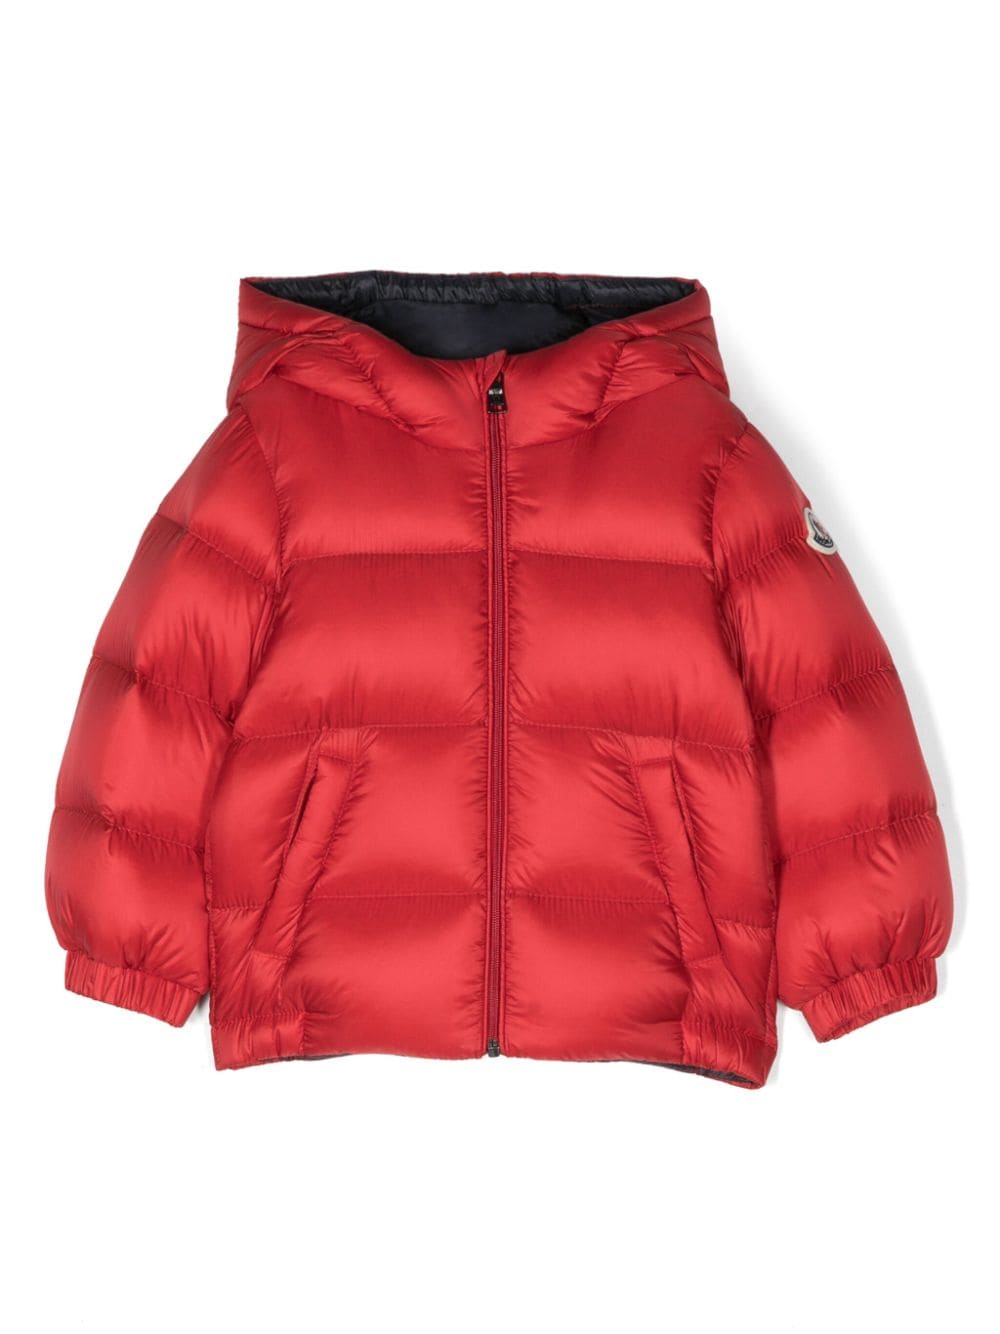 New Macaire red jacket for newborn girls